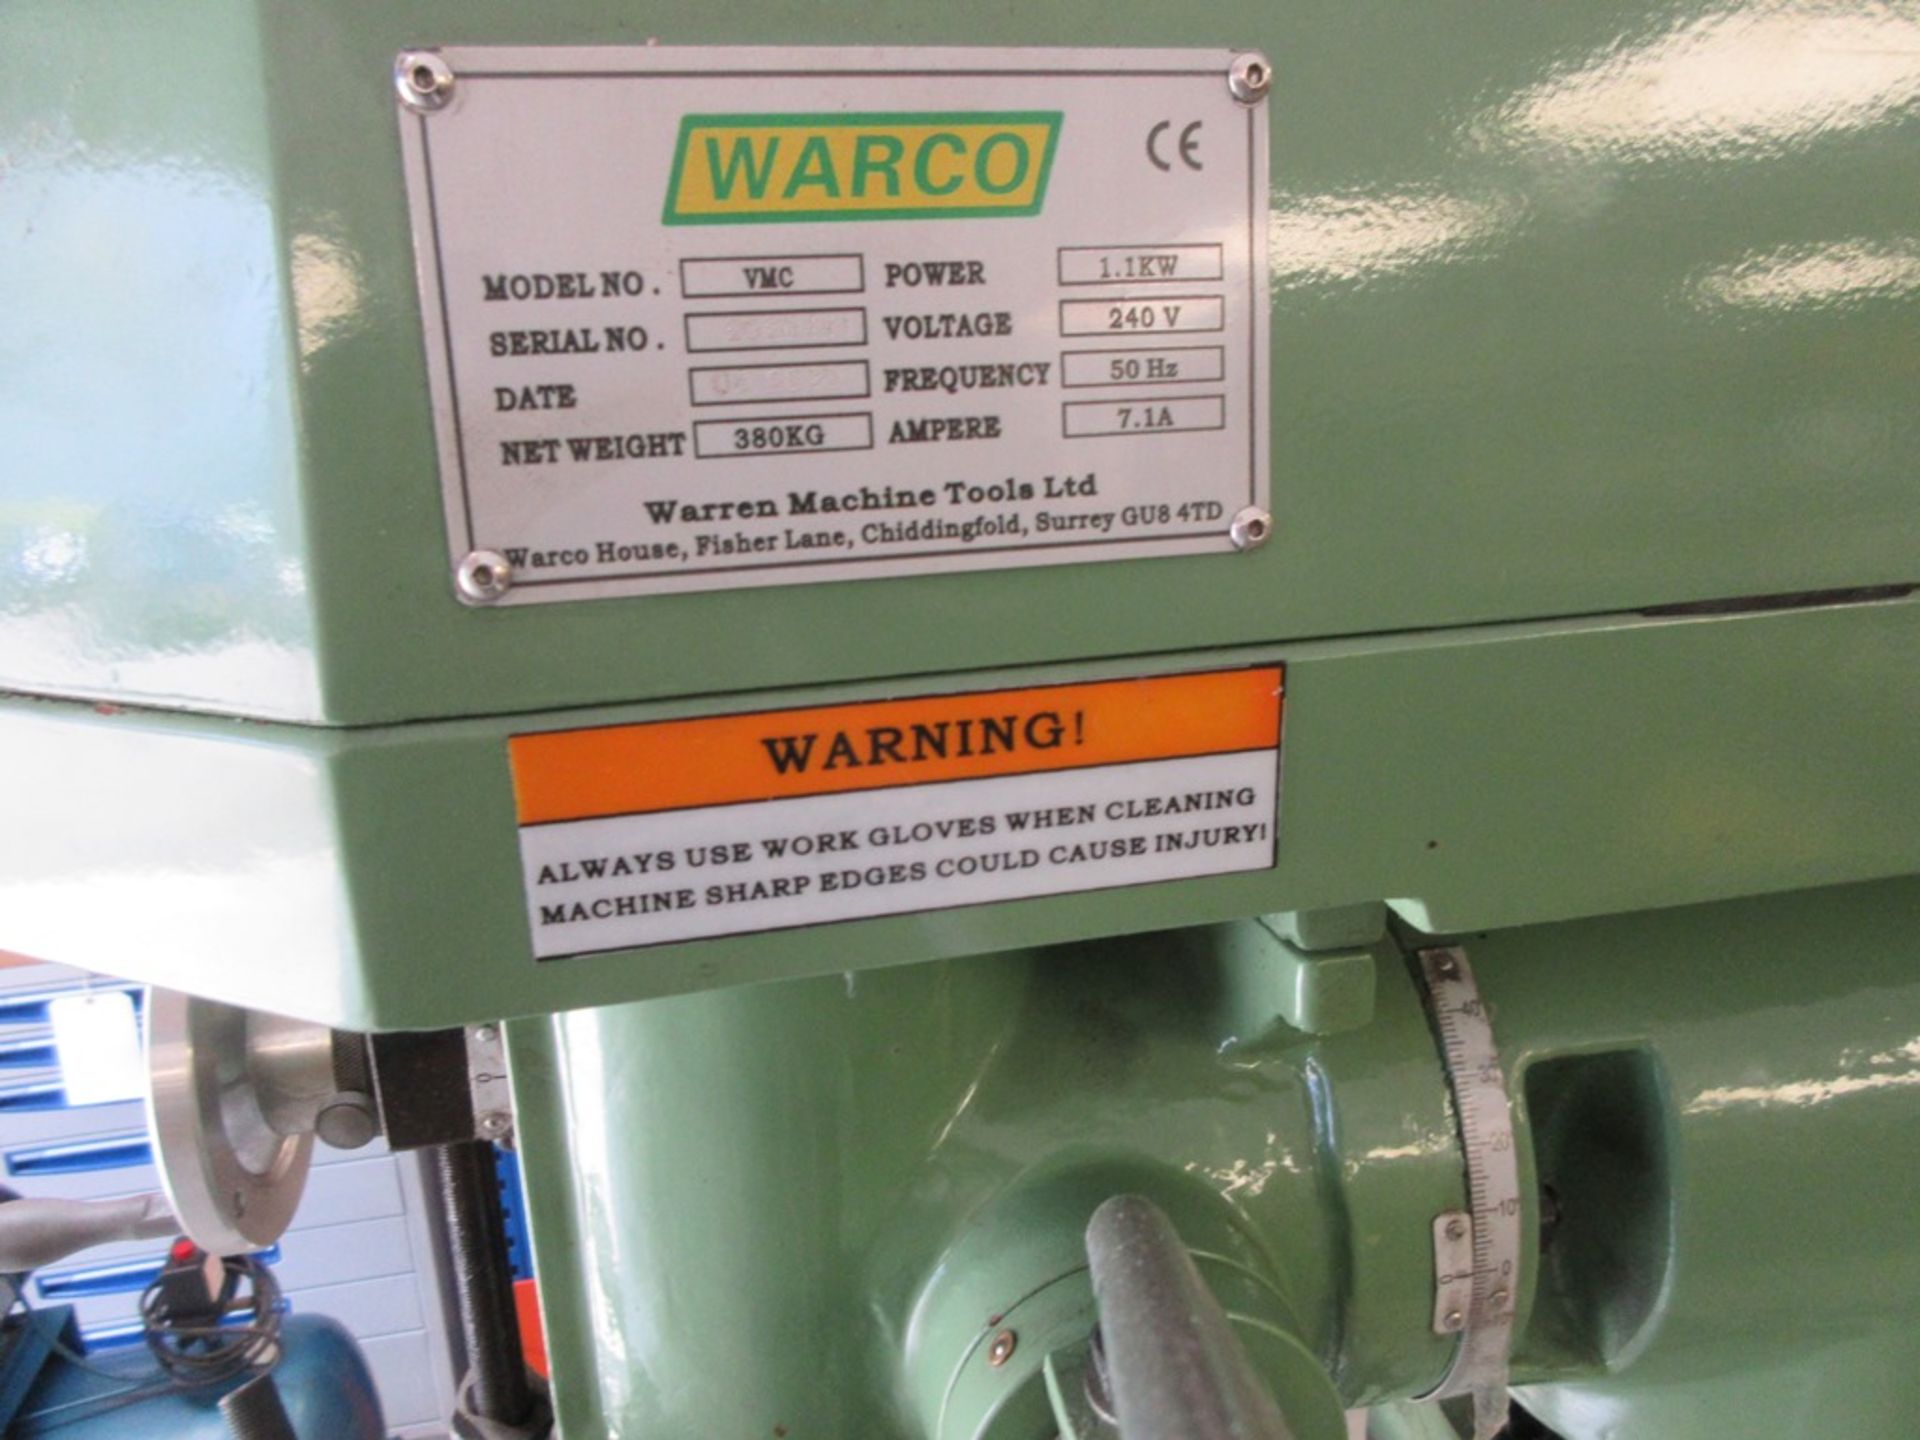 Warco Milling Machine model VMC serial no 2020441 manufactured 06 2020 - Image 2 of 7